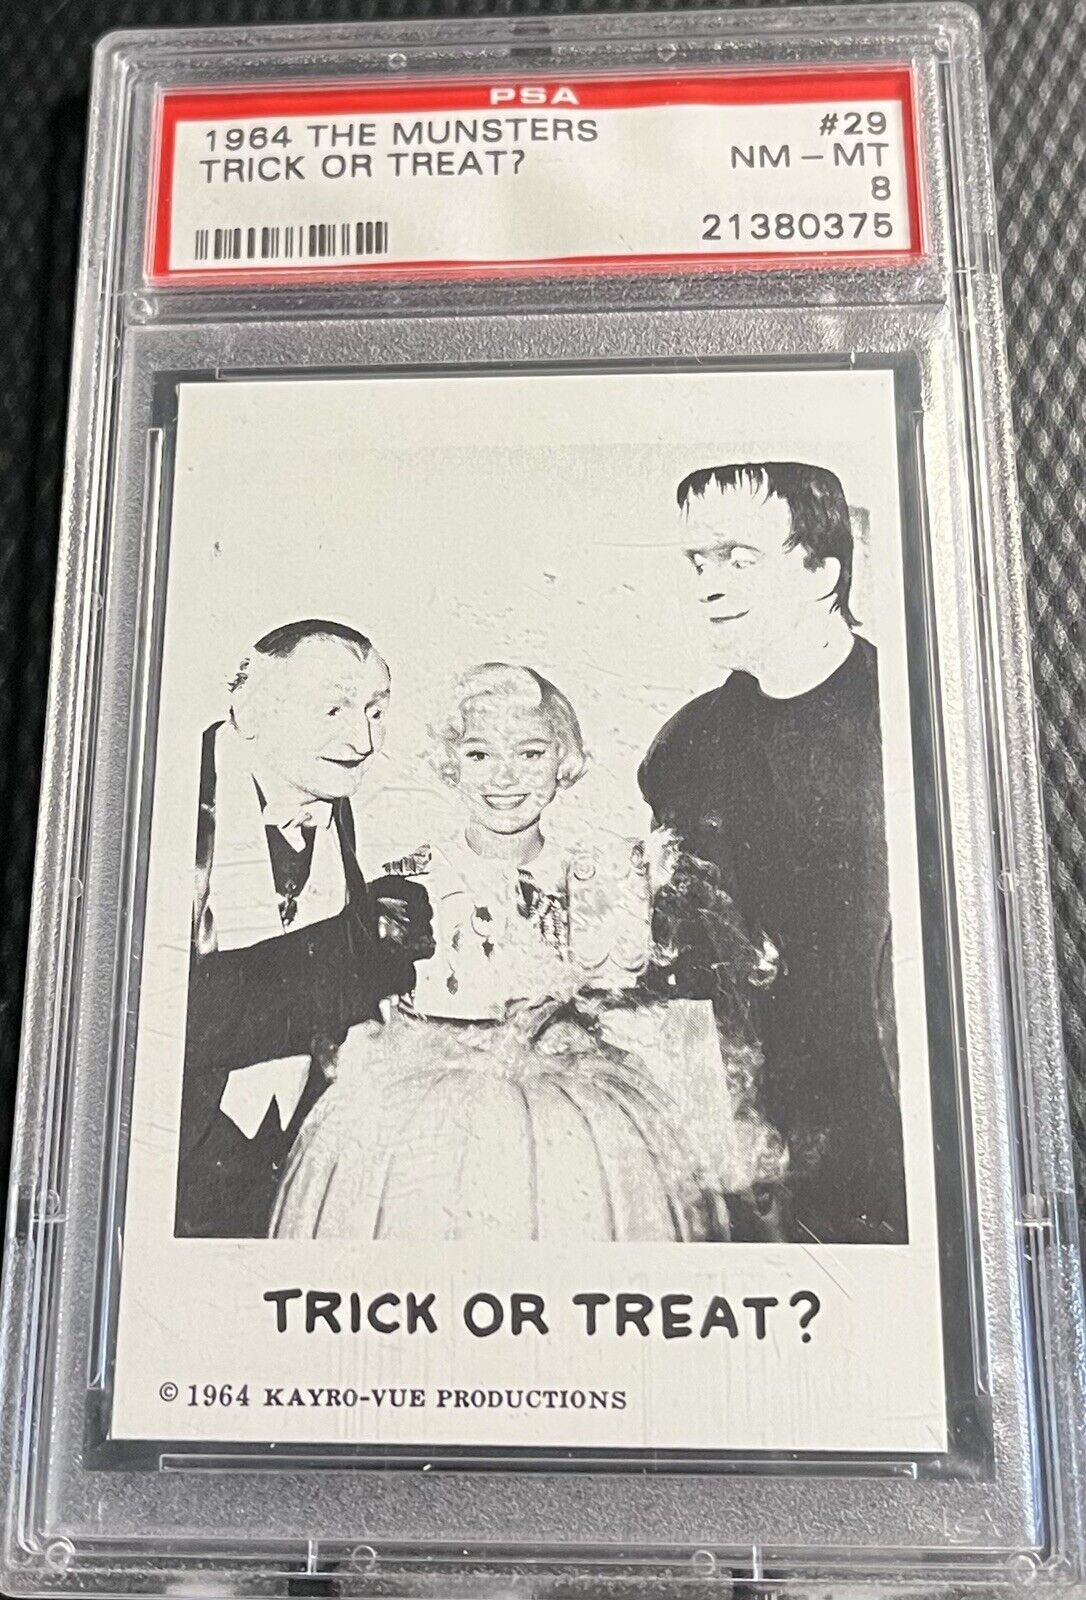 1964 The Munsters USA PSA 8 Card #29 Trick of Treat - Kayro Vue Productions